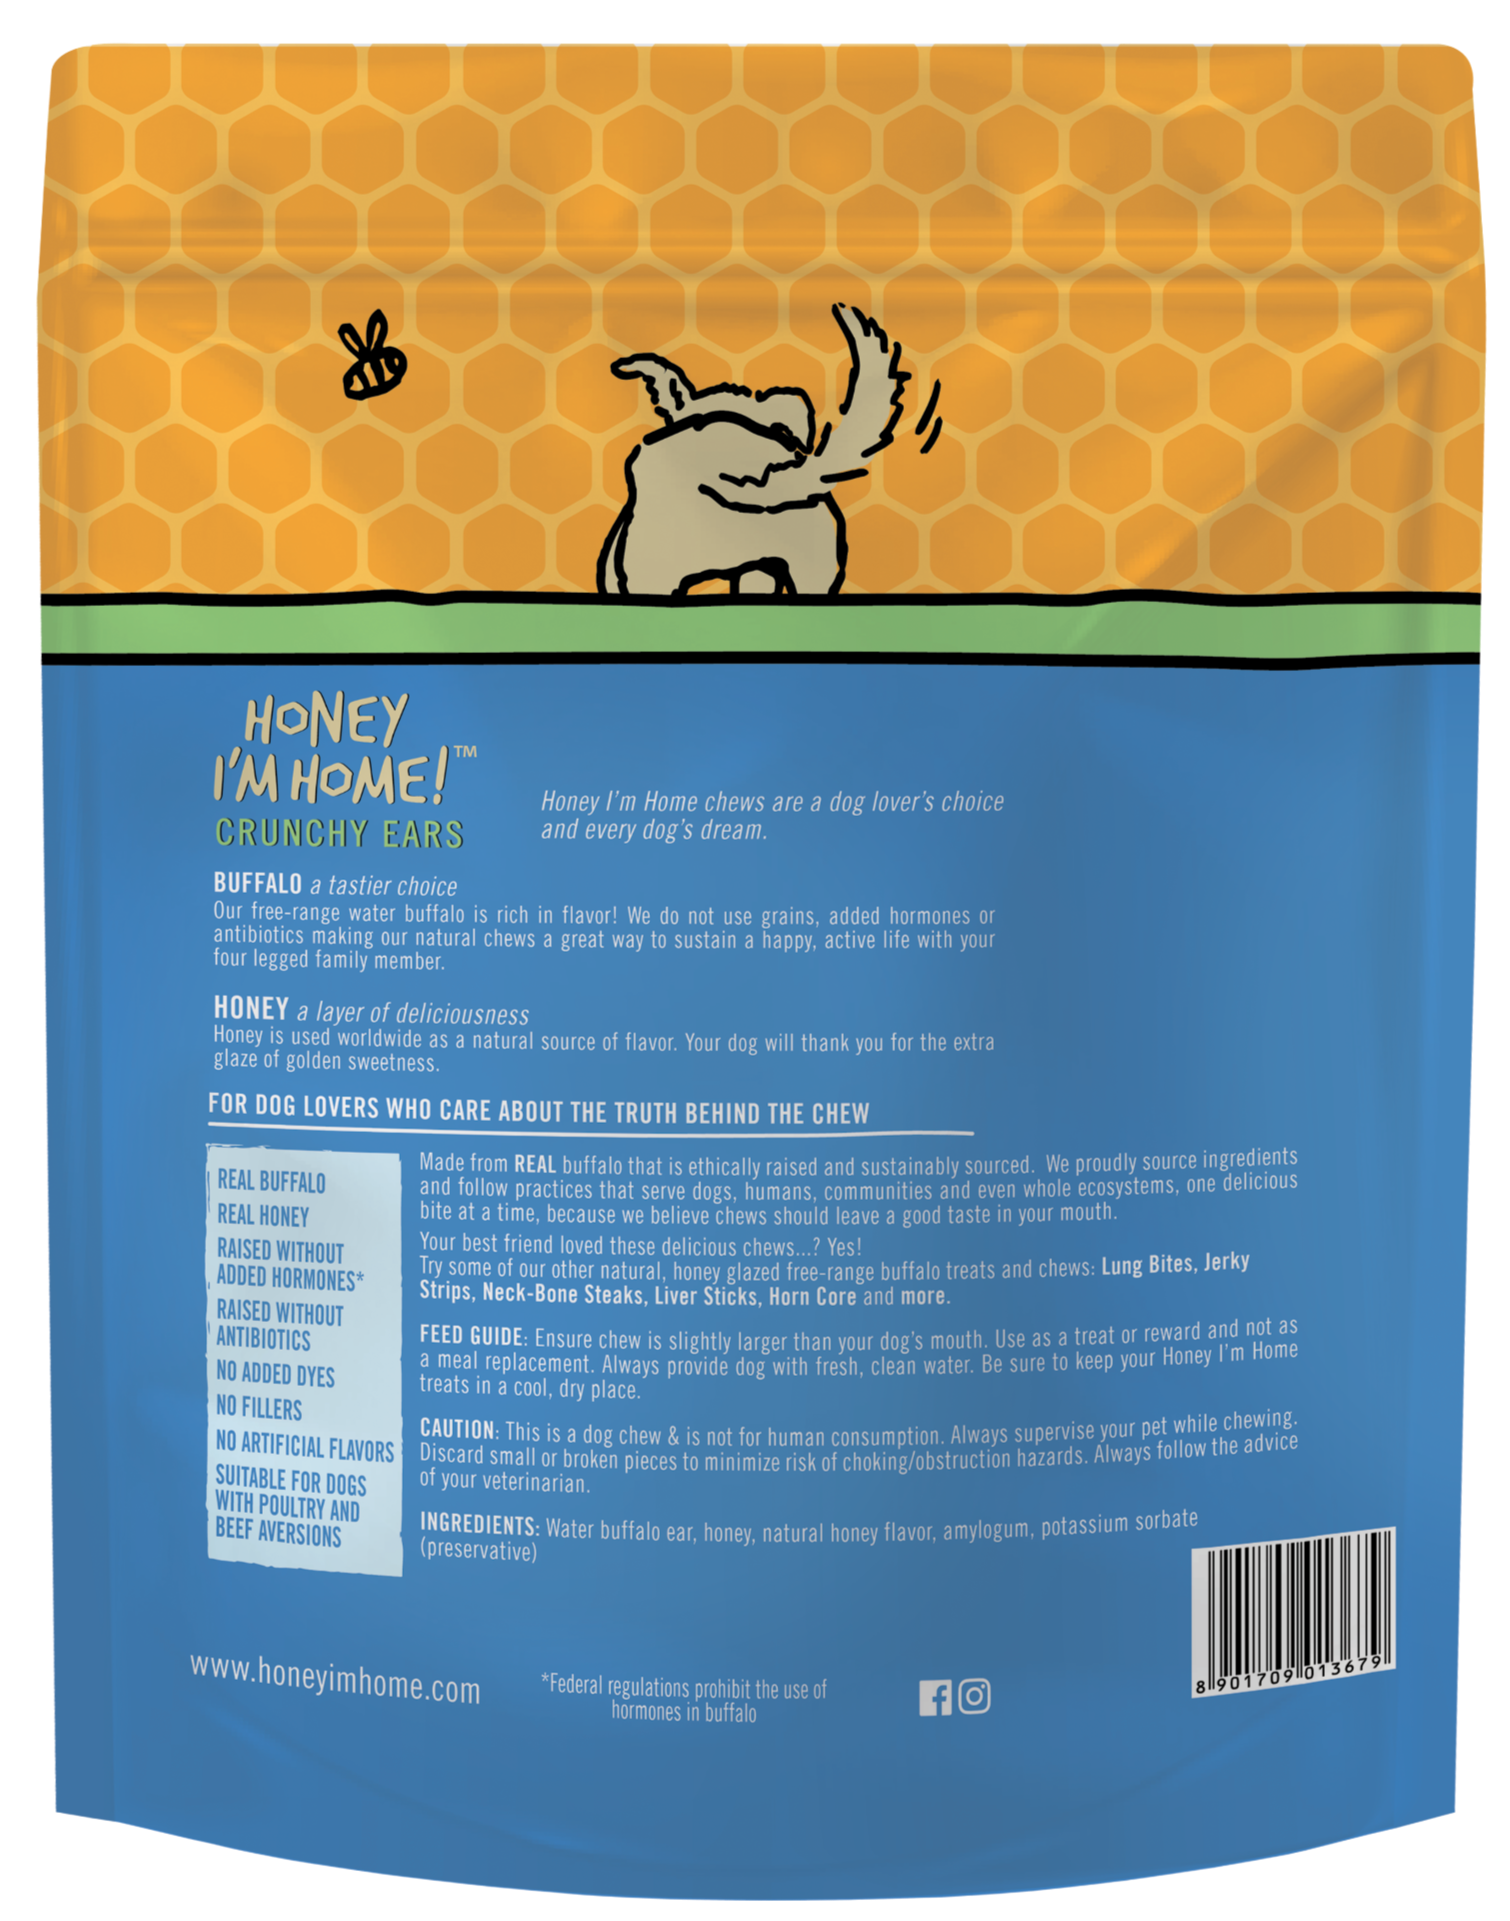 Back of package with ingredients and benefits.